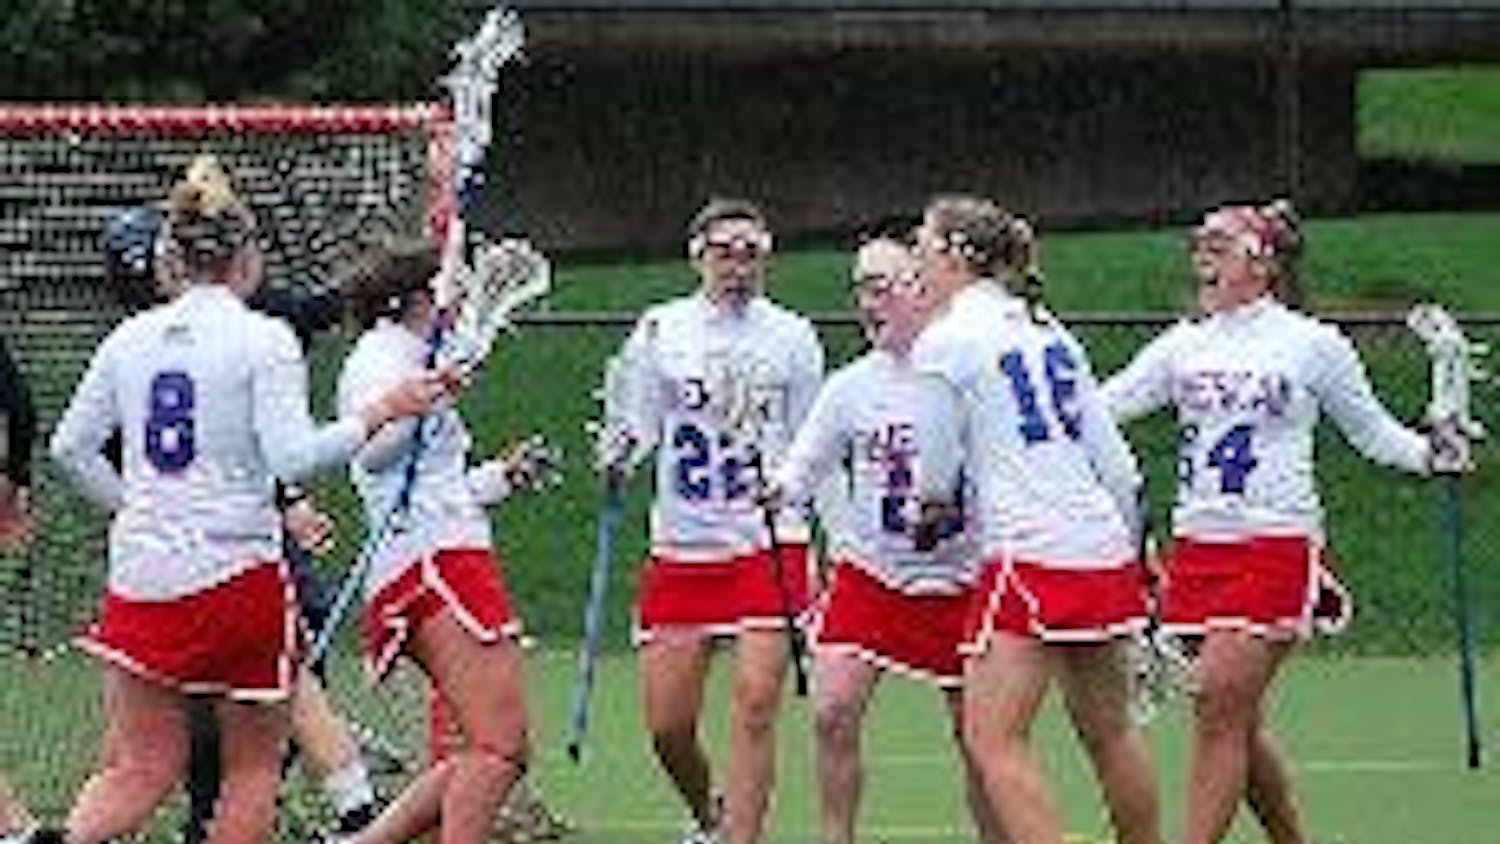 GOAL - The Eagles' offense celebrates one of Bernadette Maher's three goals.  Despite Maher's three goal performance and the Eagles' 12 total goals, the team was no match for the rain and 16 goals from the University of Richmond Spiders. The Eagles play t